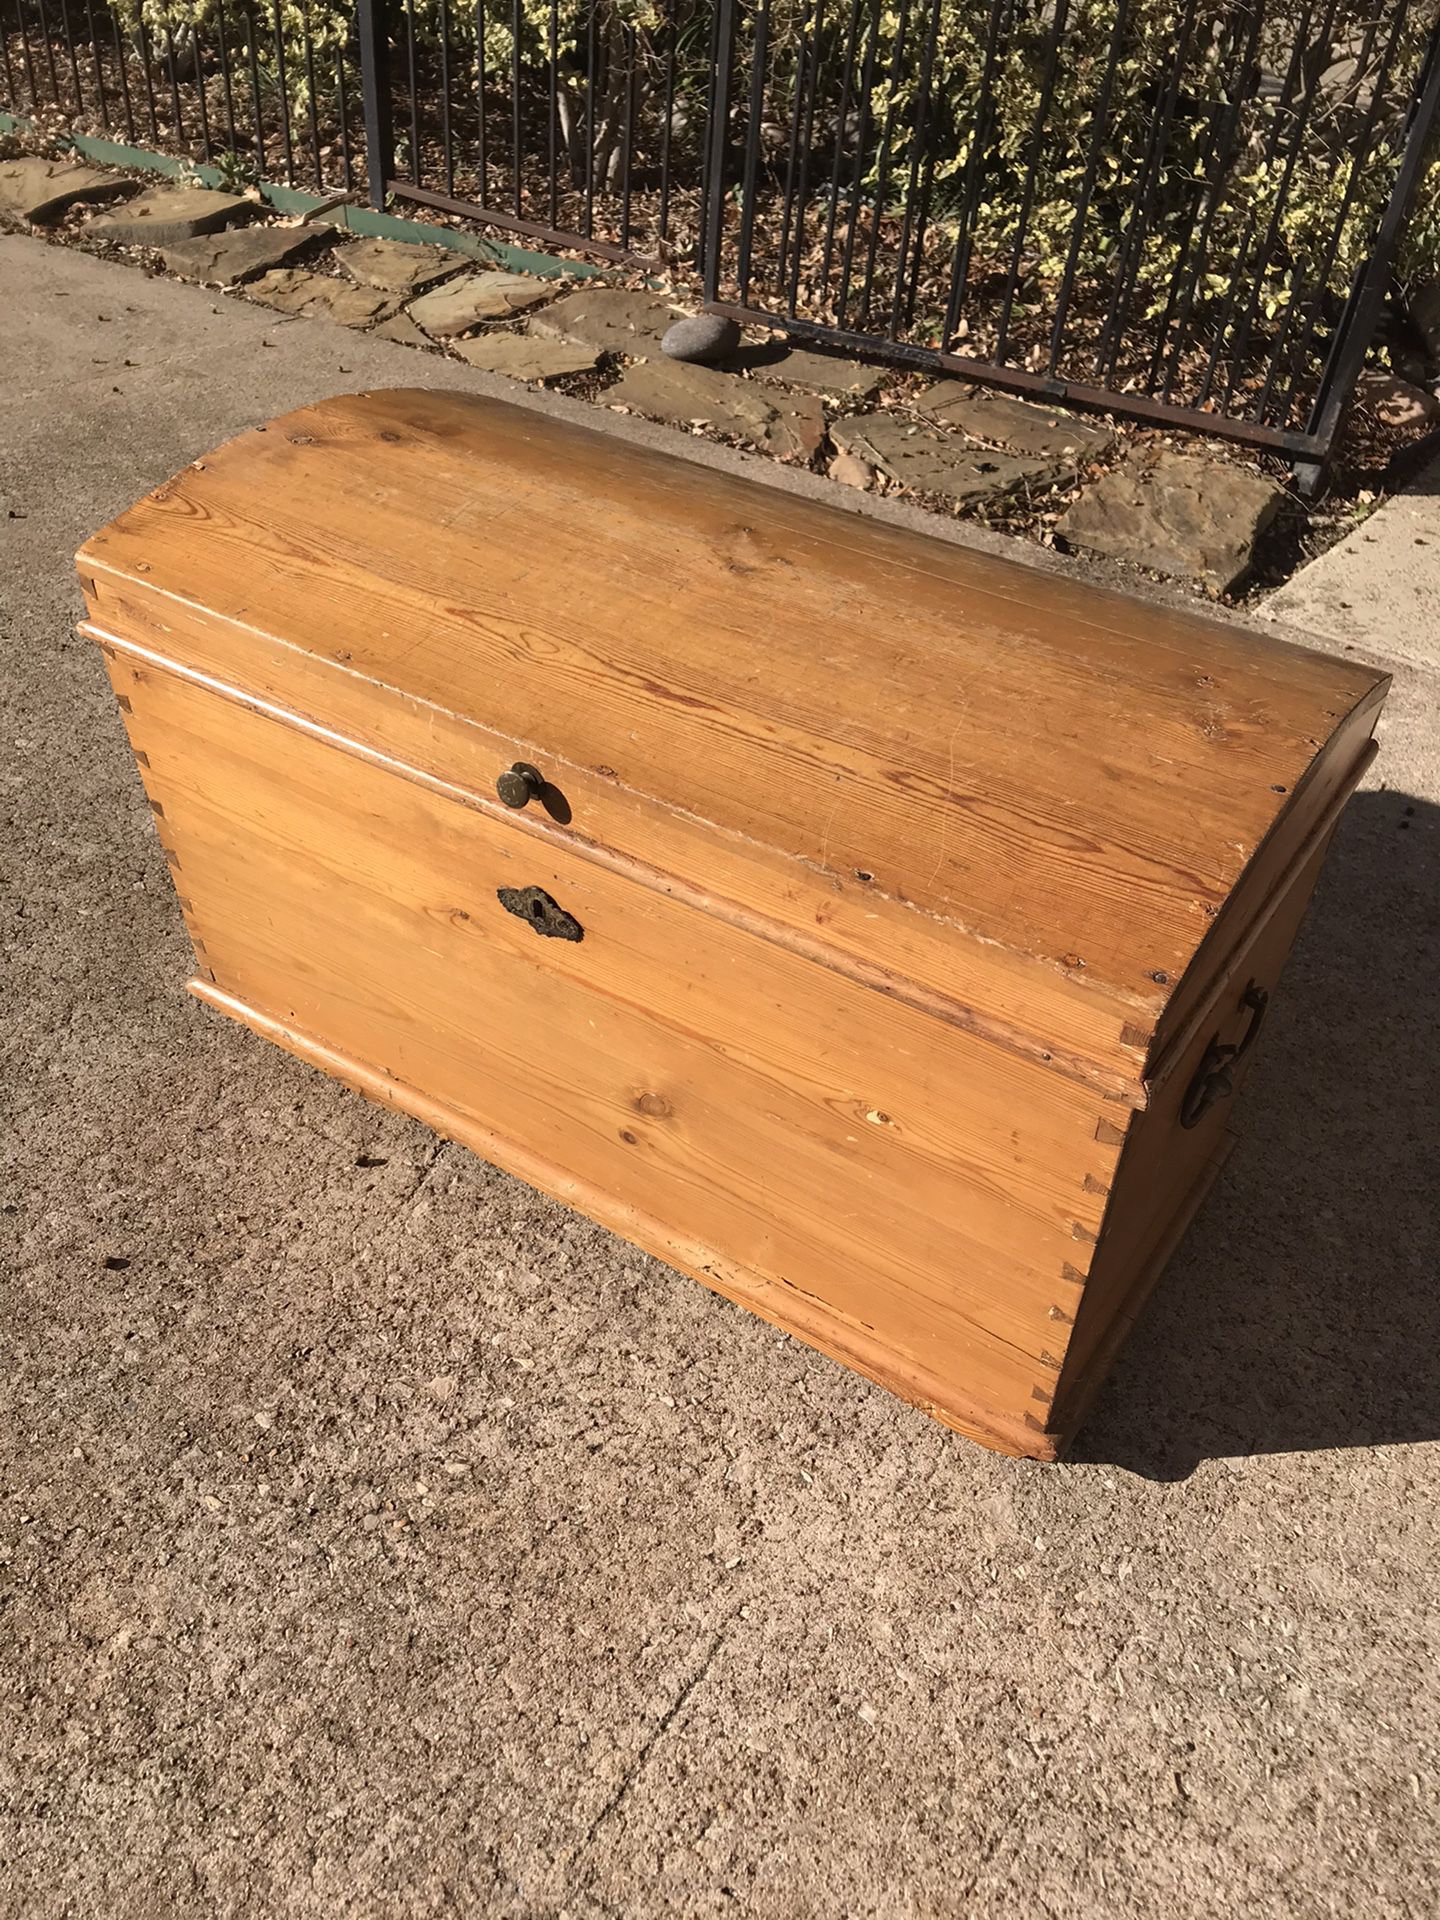 Wooden chest, 3ft wide, 20 inch deep, 23 inches tall